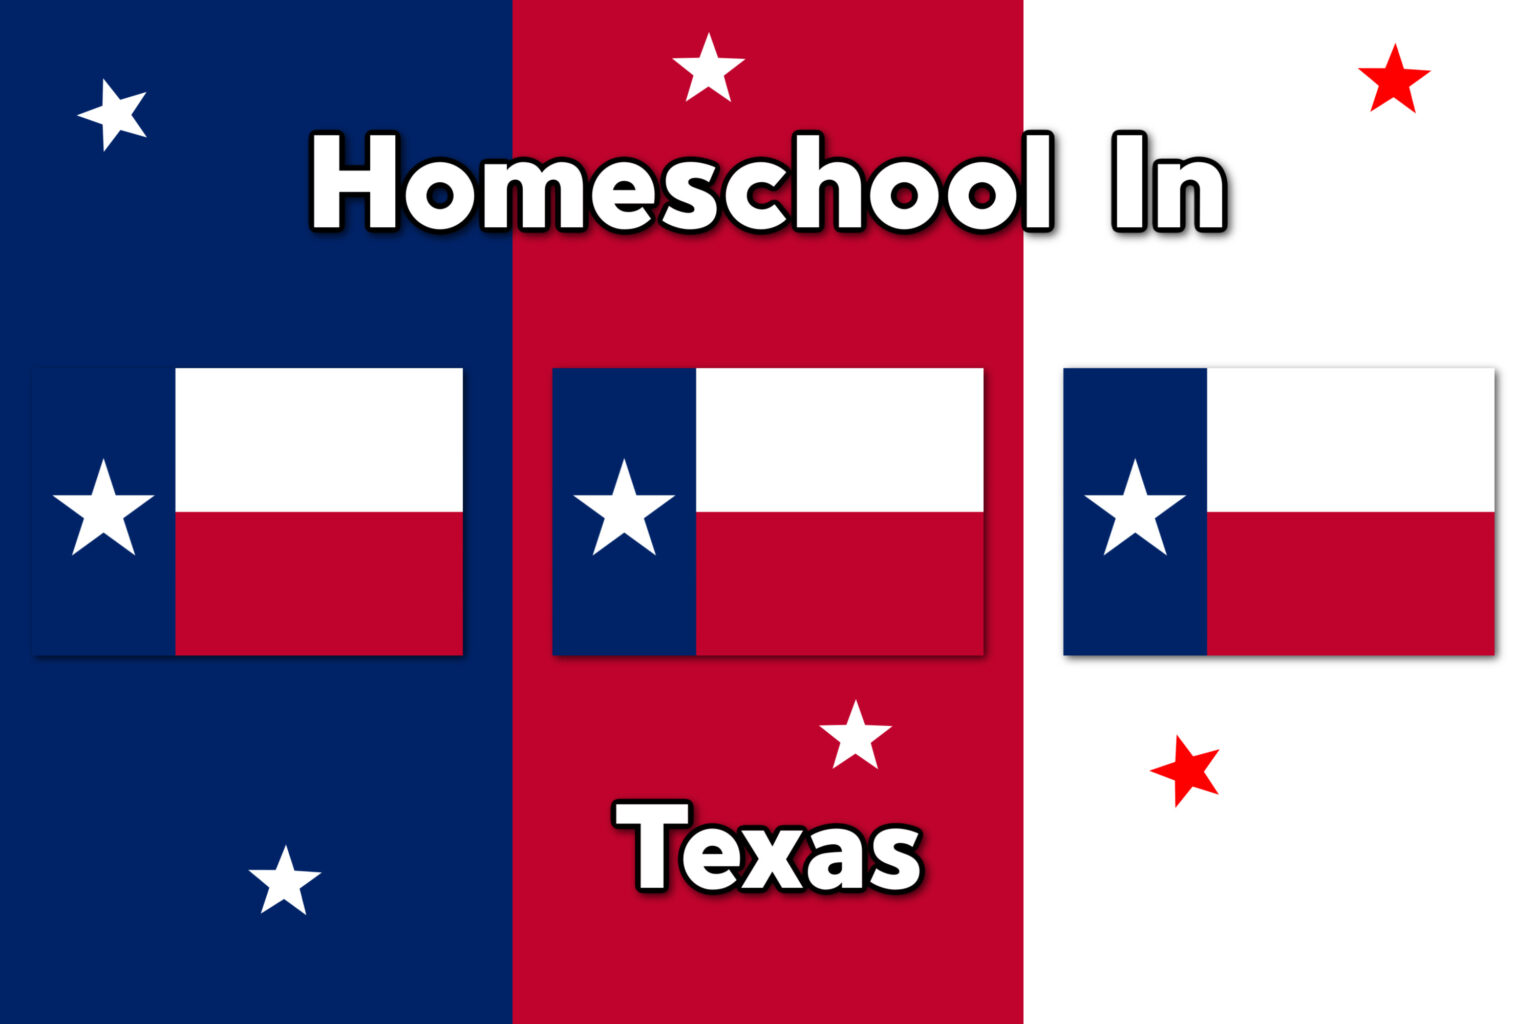 homeschooling-in-texas-how-to-homeschool-while-following-state-laws